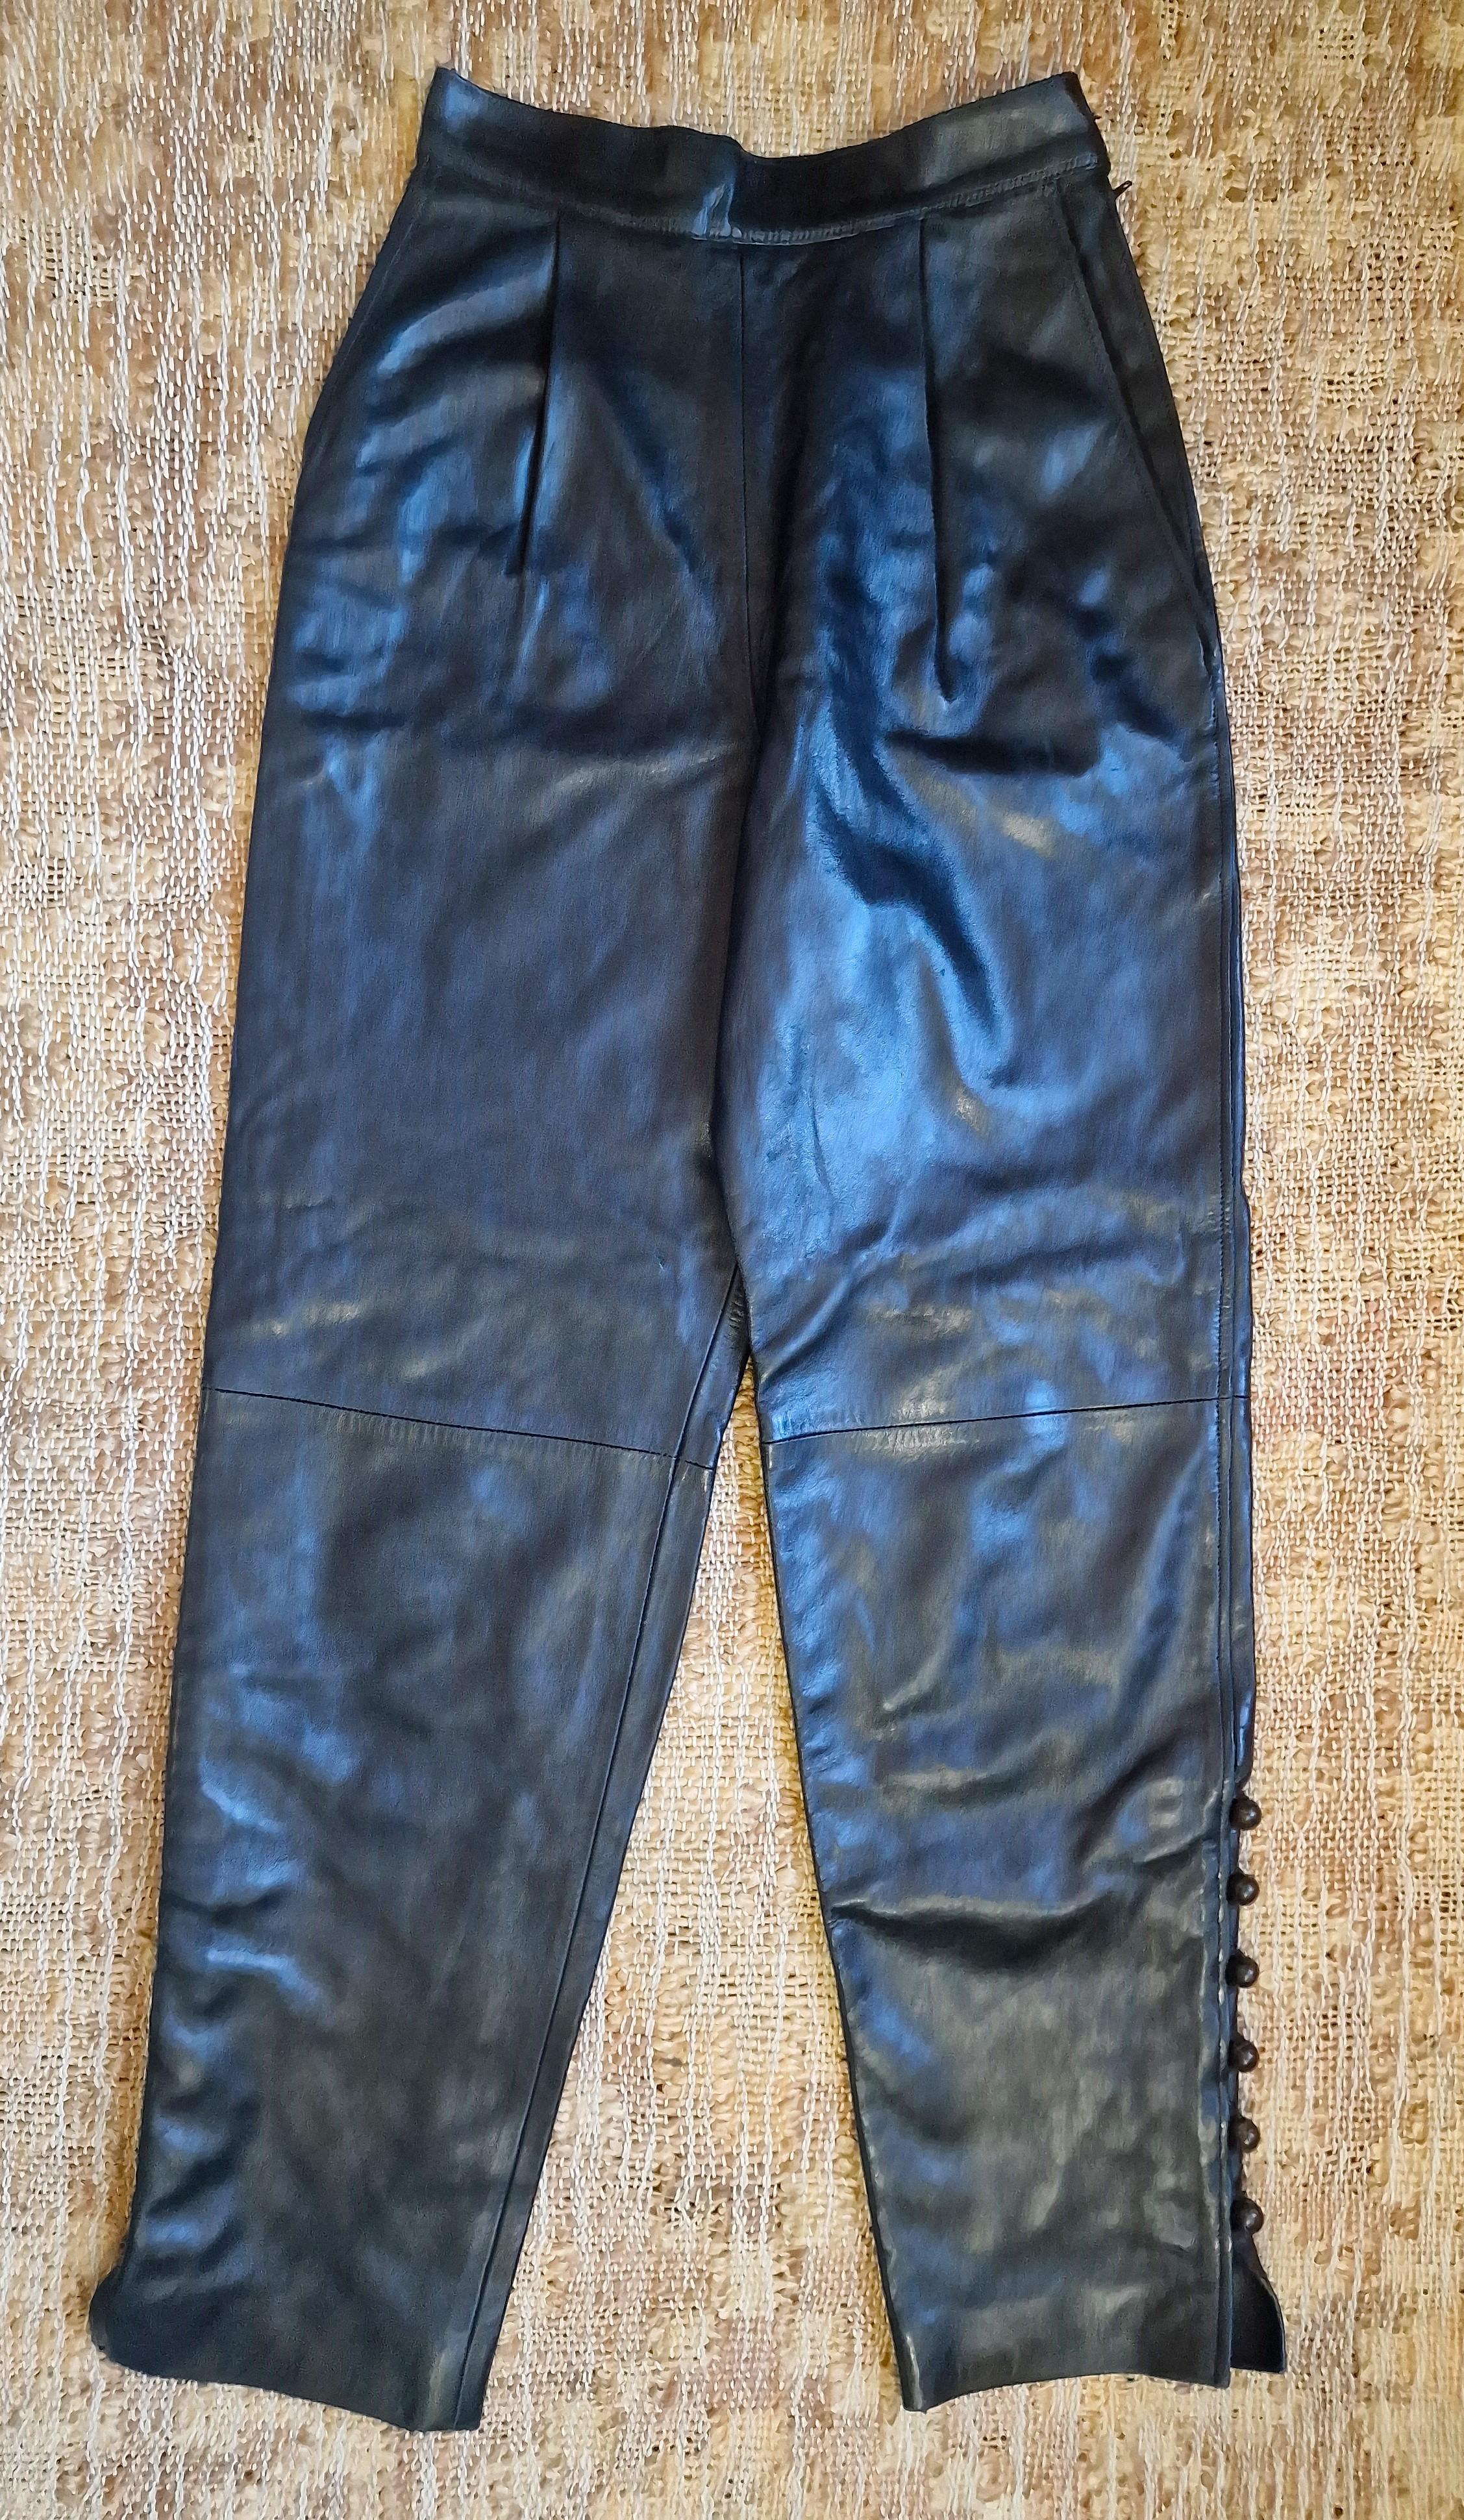 Leather pants by Yves Saint Laurent!
Rive Gauche line!
High waist!
6 wooden buttons at the botton!

VERY GOOD condition!

SIZE
Small.
Makred size: FR38
Length: 102 cm / 40.2 inch
Waist: 30 cm / 11.8 inch
Hips: 47 cm / 18.5 inch
Rise: 35 cm / 13.8